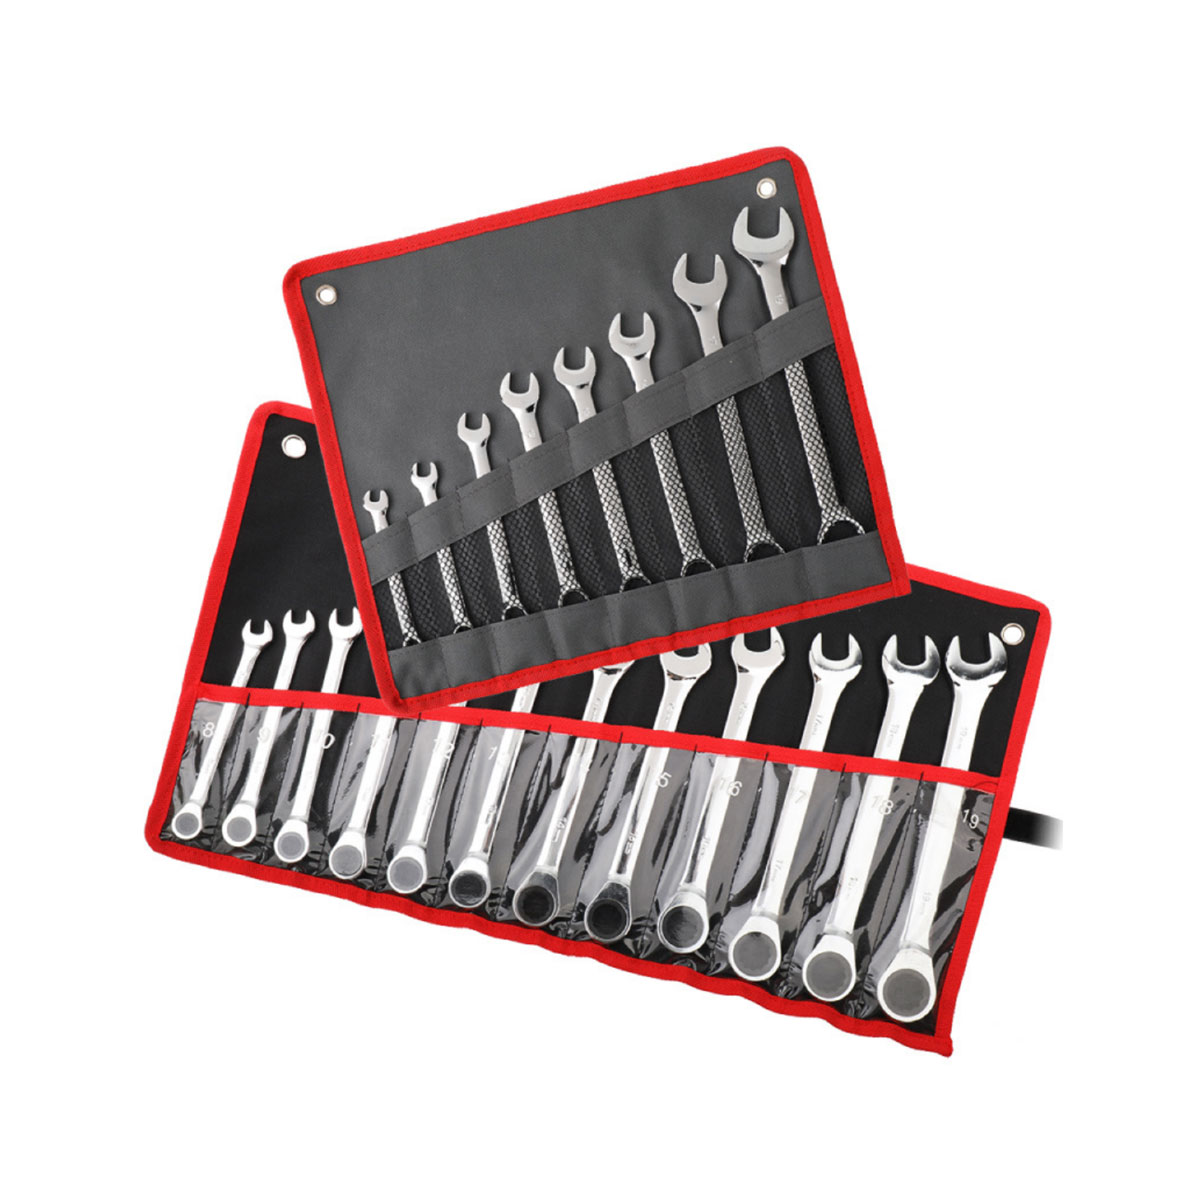 Reparare Tools Combination Carbon Steel Single Open End Ring Spanner Wrench Set